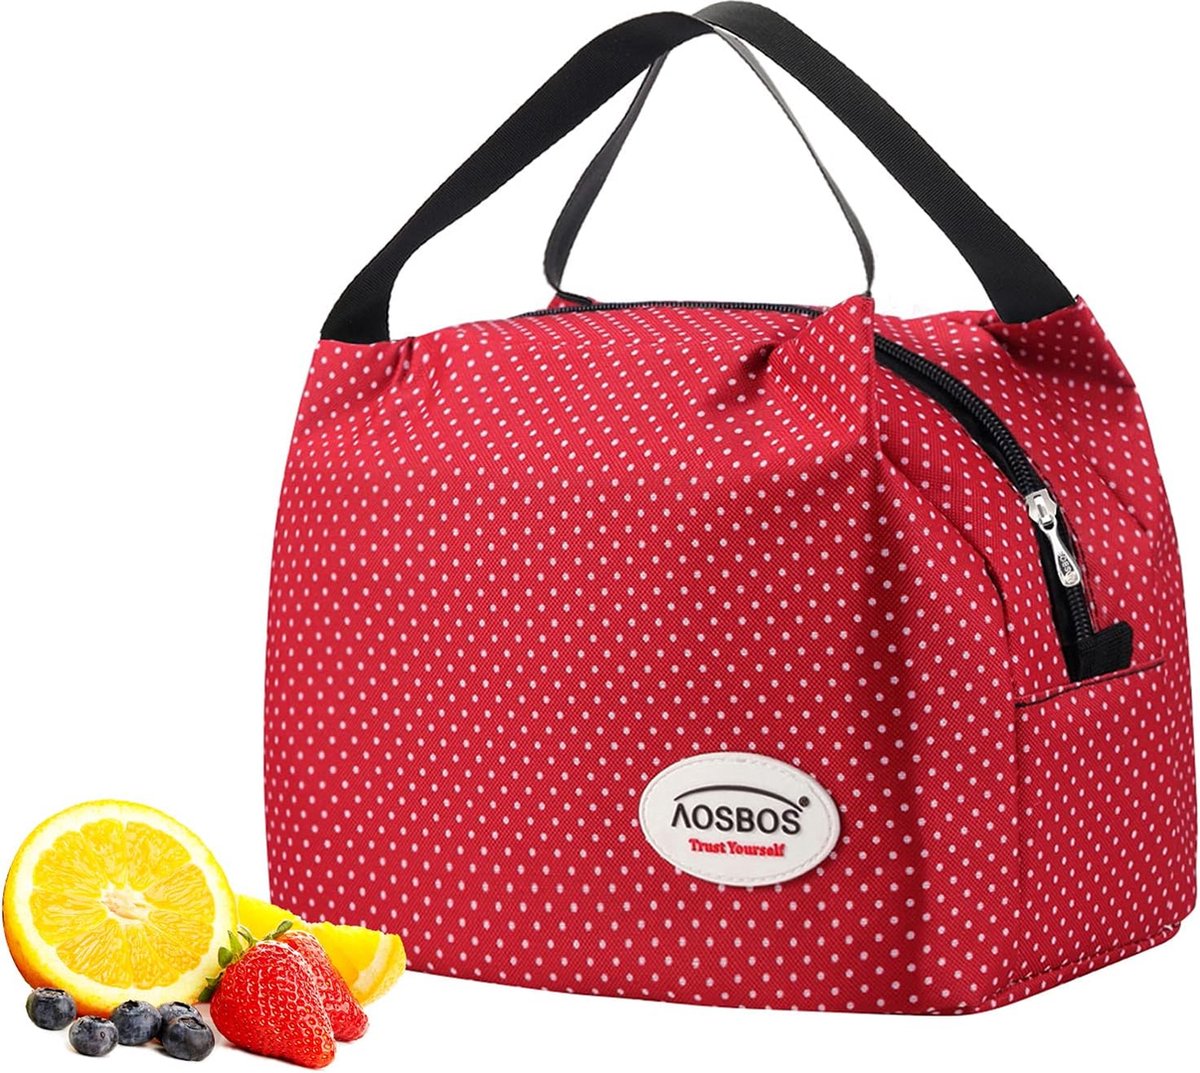 Sac Isotherme Repas Femme, 6L Sac Lunch Isotherme Bureau, Lunch